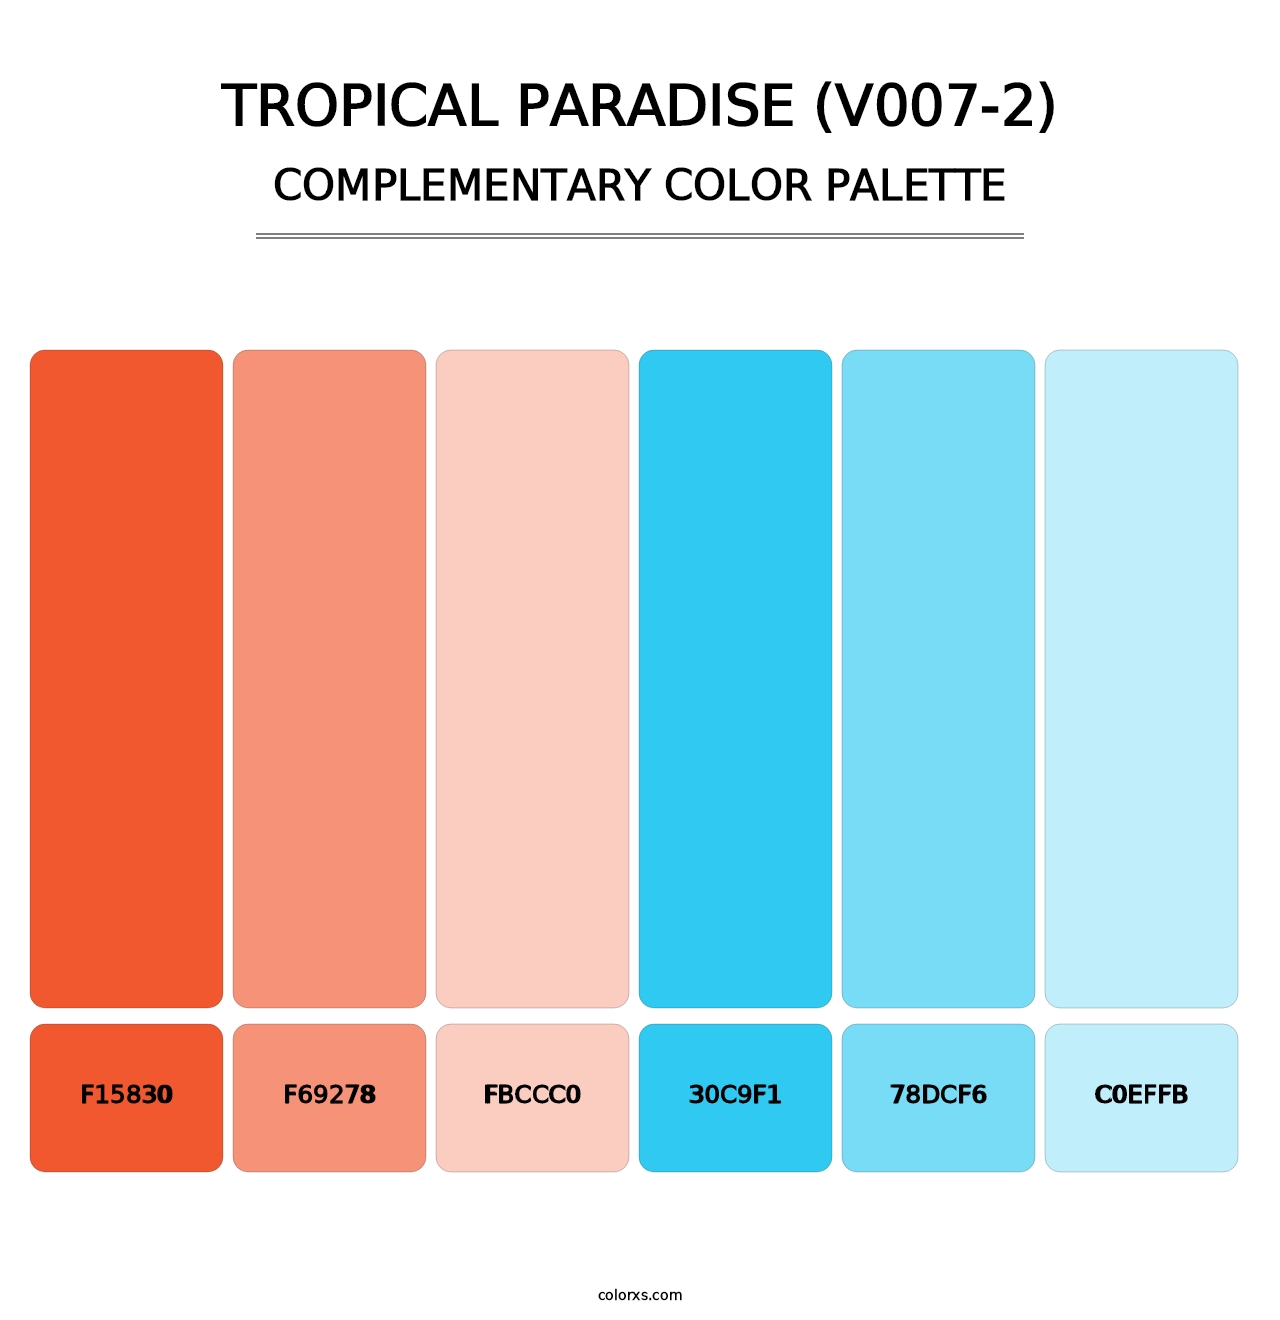 Tropical Paradise (V007-2) - Complementary Color Palette